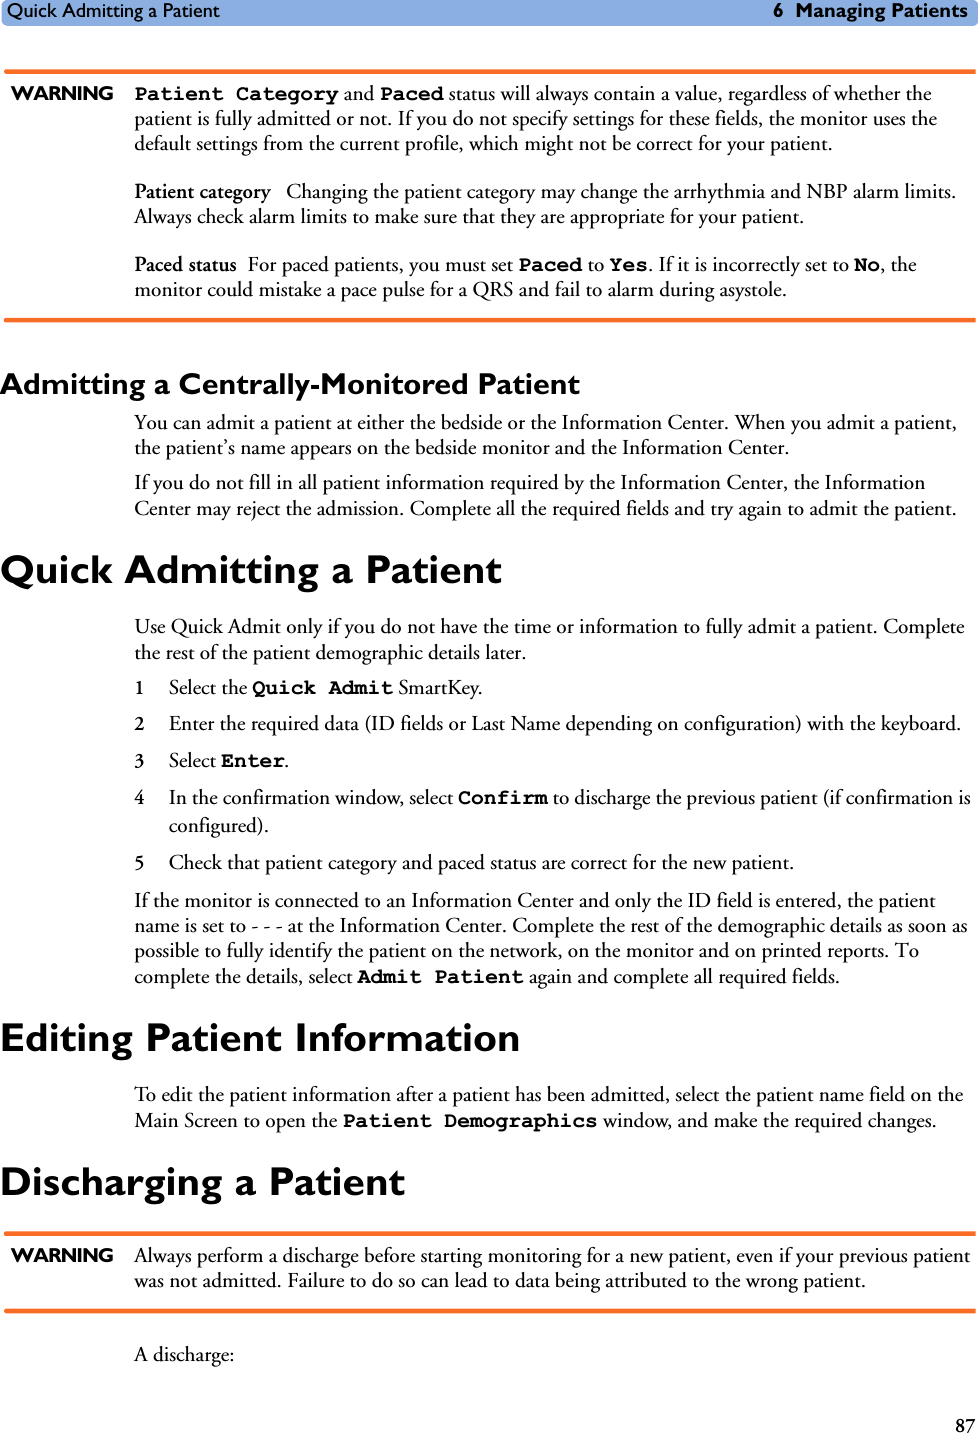 Quick Admitting a Patient 6 Managing Patients87WARNING Patient Category and Paced status will always contain a value, regardless of whether the patient is fully admitted or not. If you do not specify settings for these fields, the monitor uses the default settings from the current profile, which might not be correct for your patient.Patient category  Changing the patient category may change the arrhythmia and NBP alarm limits. Always check alarm limits to make sure that they are appropriate for your patient.Paced status For paced patients, you must set Paced to Yes. If it is incorrectly set to No, the monitor could mistake a pace pulse for a QRS and fail to alarm during asystole.Admitting a Centrally-Monitored PatientYou can admit a patient at either the bedside or the Information Center. When you admit a patient, the patient’s name appears on the bedside monitor and the Information Center.If you do not fill in all patient information required by the Information Center, the Information Center may reject the admission. Complete all the required fields and try again to admit the patient.Quick Admitting a PatientUse Quick Admit only if you do not have the time or information to fully admit a patient. Complete the rest of the patient demographic details later.1Select the Quick Admit SmartKey.2Enter the required data (ID fields or Last Name depending on configuration) with the keyboard.3Select Enter.4In the confirmation window, select Confirm to discharge the previous patient (if confirmation is configured). 5Check that patient category and paced status are correct for the new patient.If the monitor is connected to an Information Center and only the ID field is entered, the patient name is set to - - - at the Information Center. Complete the rest of the demographic details as soon as possible to fully identify the patient on the network, on the monitor and on printed reports. To complete the details, select Admit Patient again and complete all required fields. Editing Patient InformationTo edit the patient information after a patient has been admitted, select the patient name field on the Main Screen to open the Patient Demographics window, and make the required changes.Discharging a PatientWARNING Always perform a discharge before starting monitoring for a new patient, even if your previous patient was not admitted. Failure to do so can lead to data being attributed to the wrong patient.A discharge: